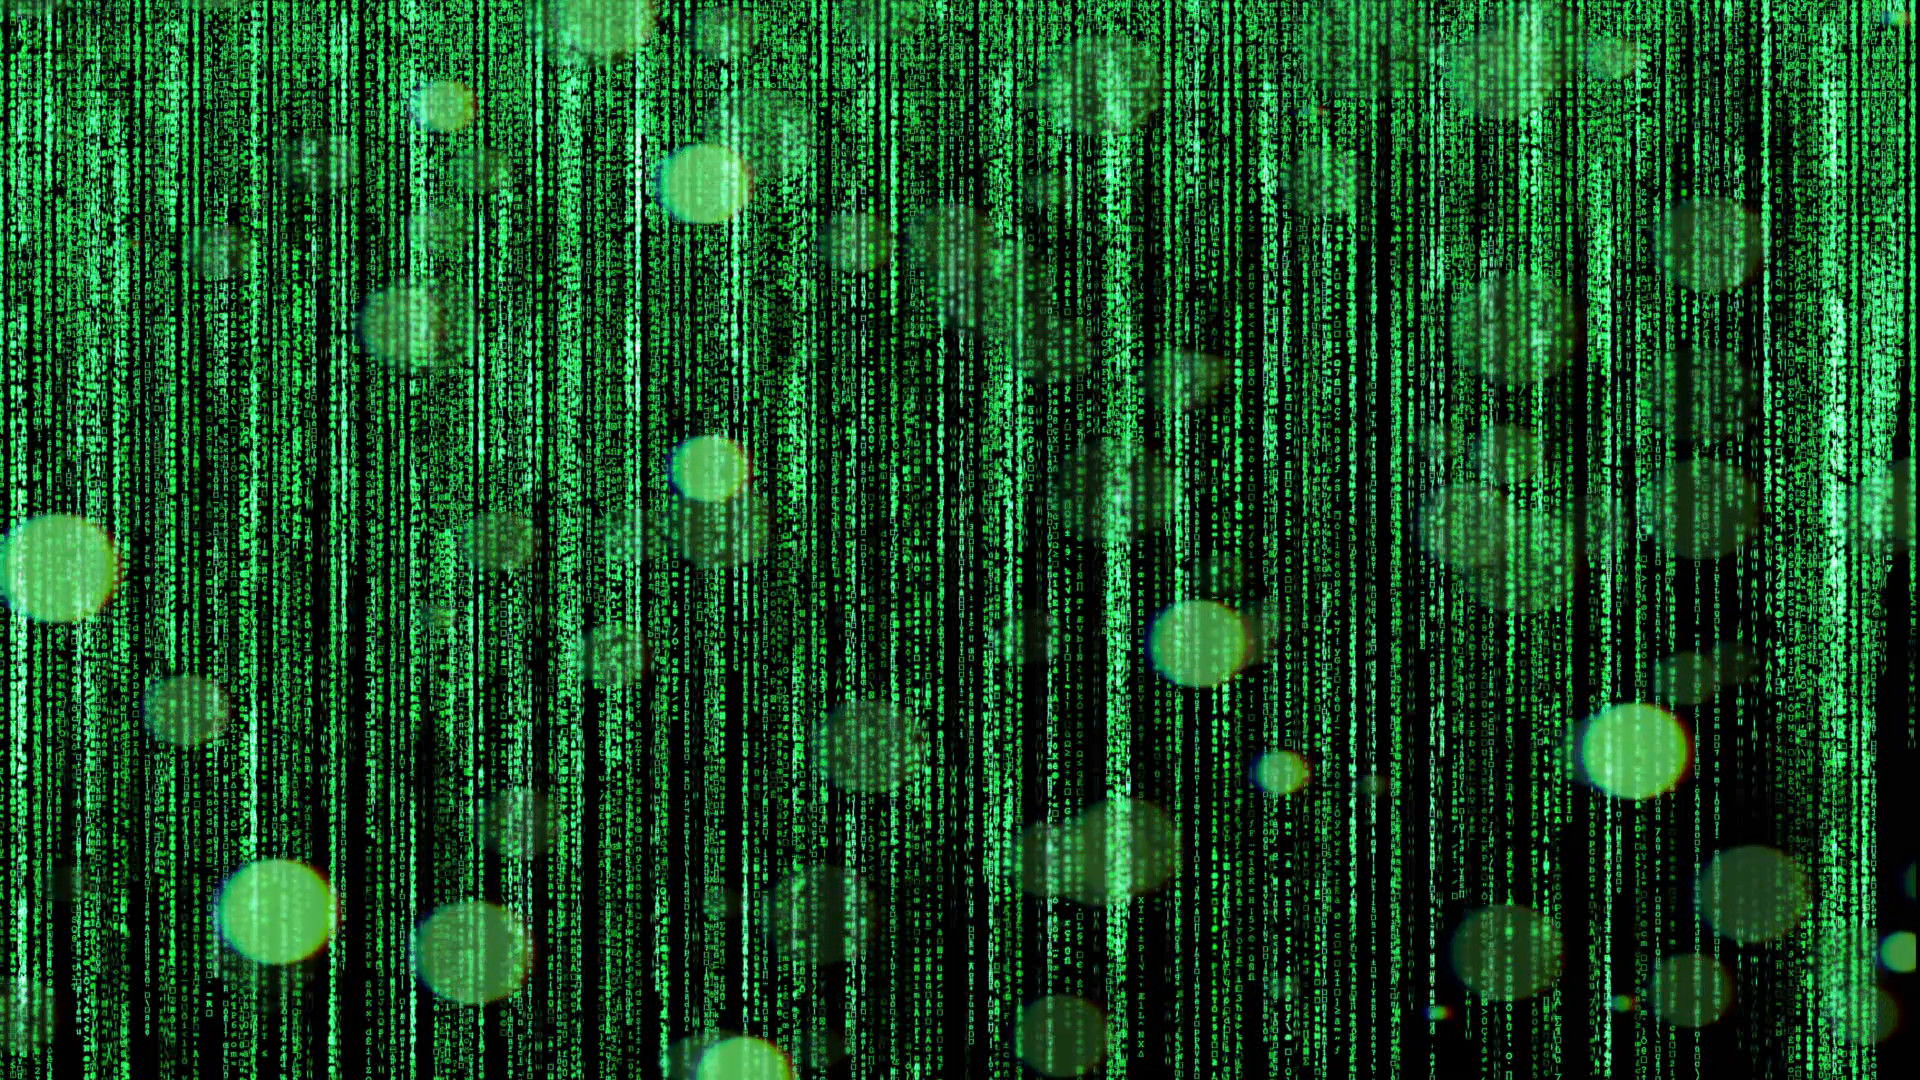 1920x1080 Big green matrix background, computer code with symbols and characters.